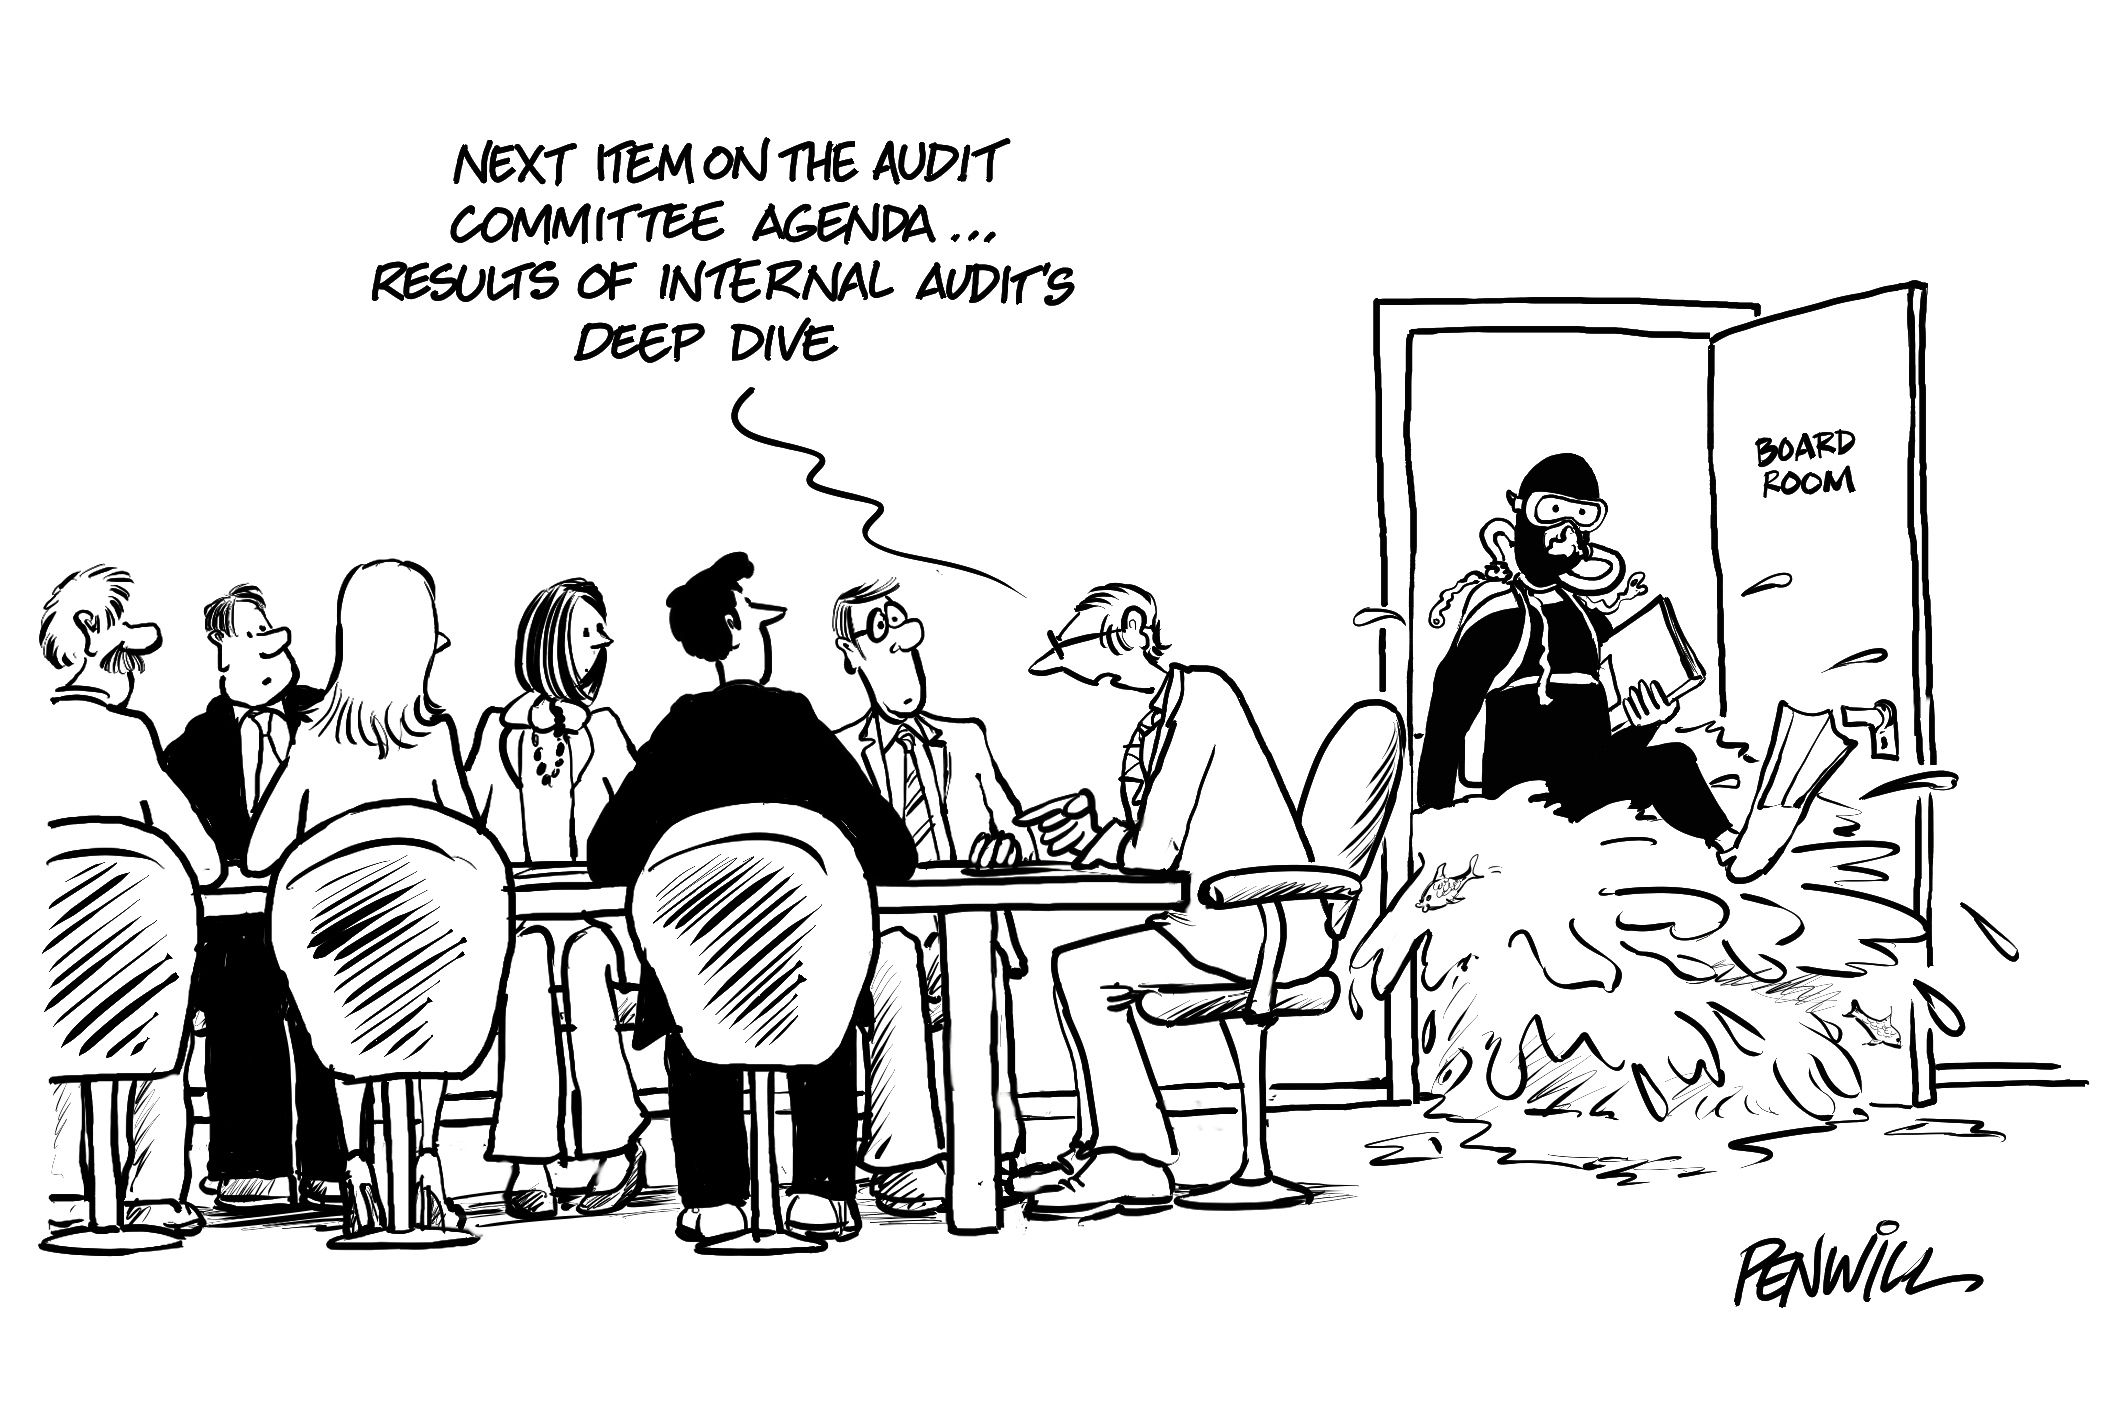 The Audit Committee’s expectation from an Internal Auditor